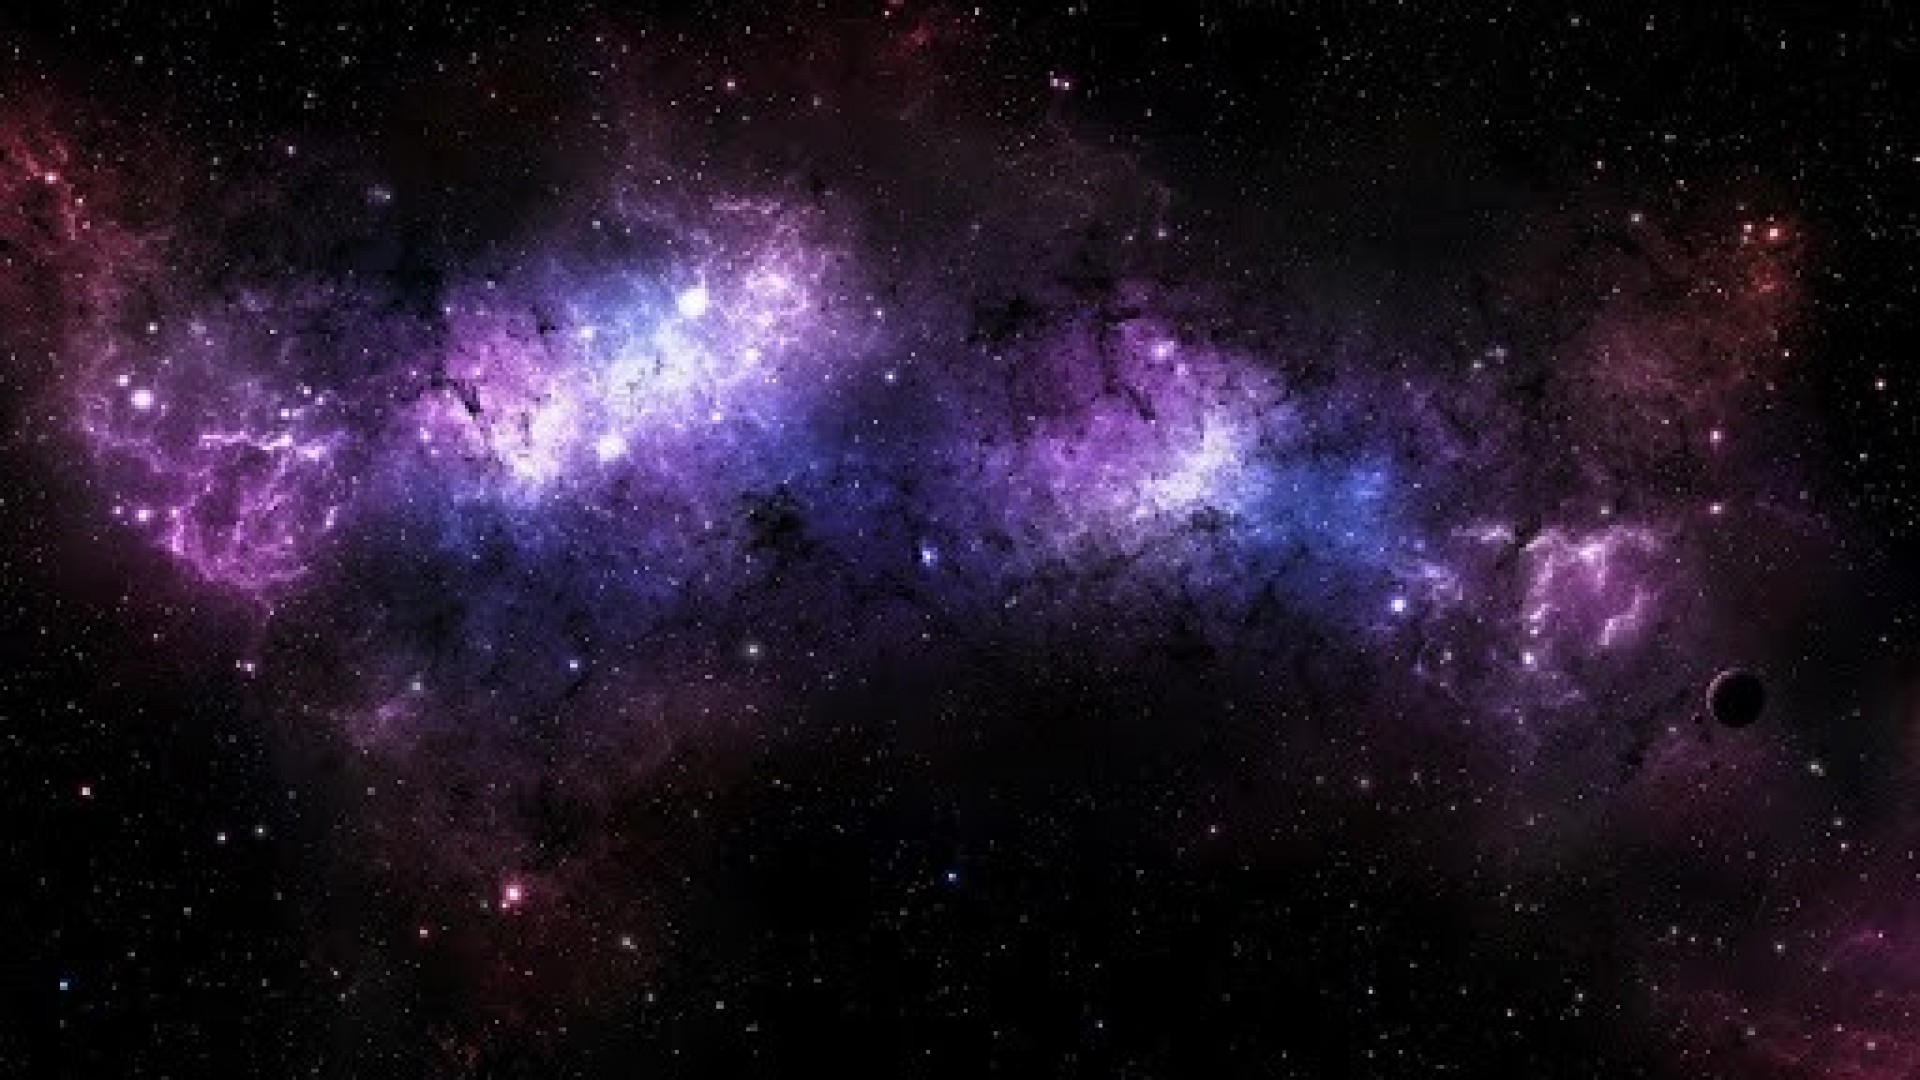 [48+] Space Wallpaper for Android on WallpaperSafari